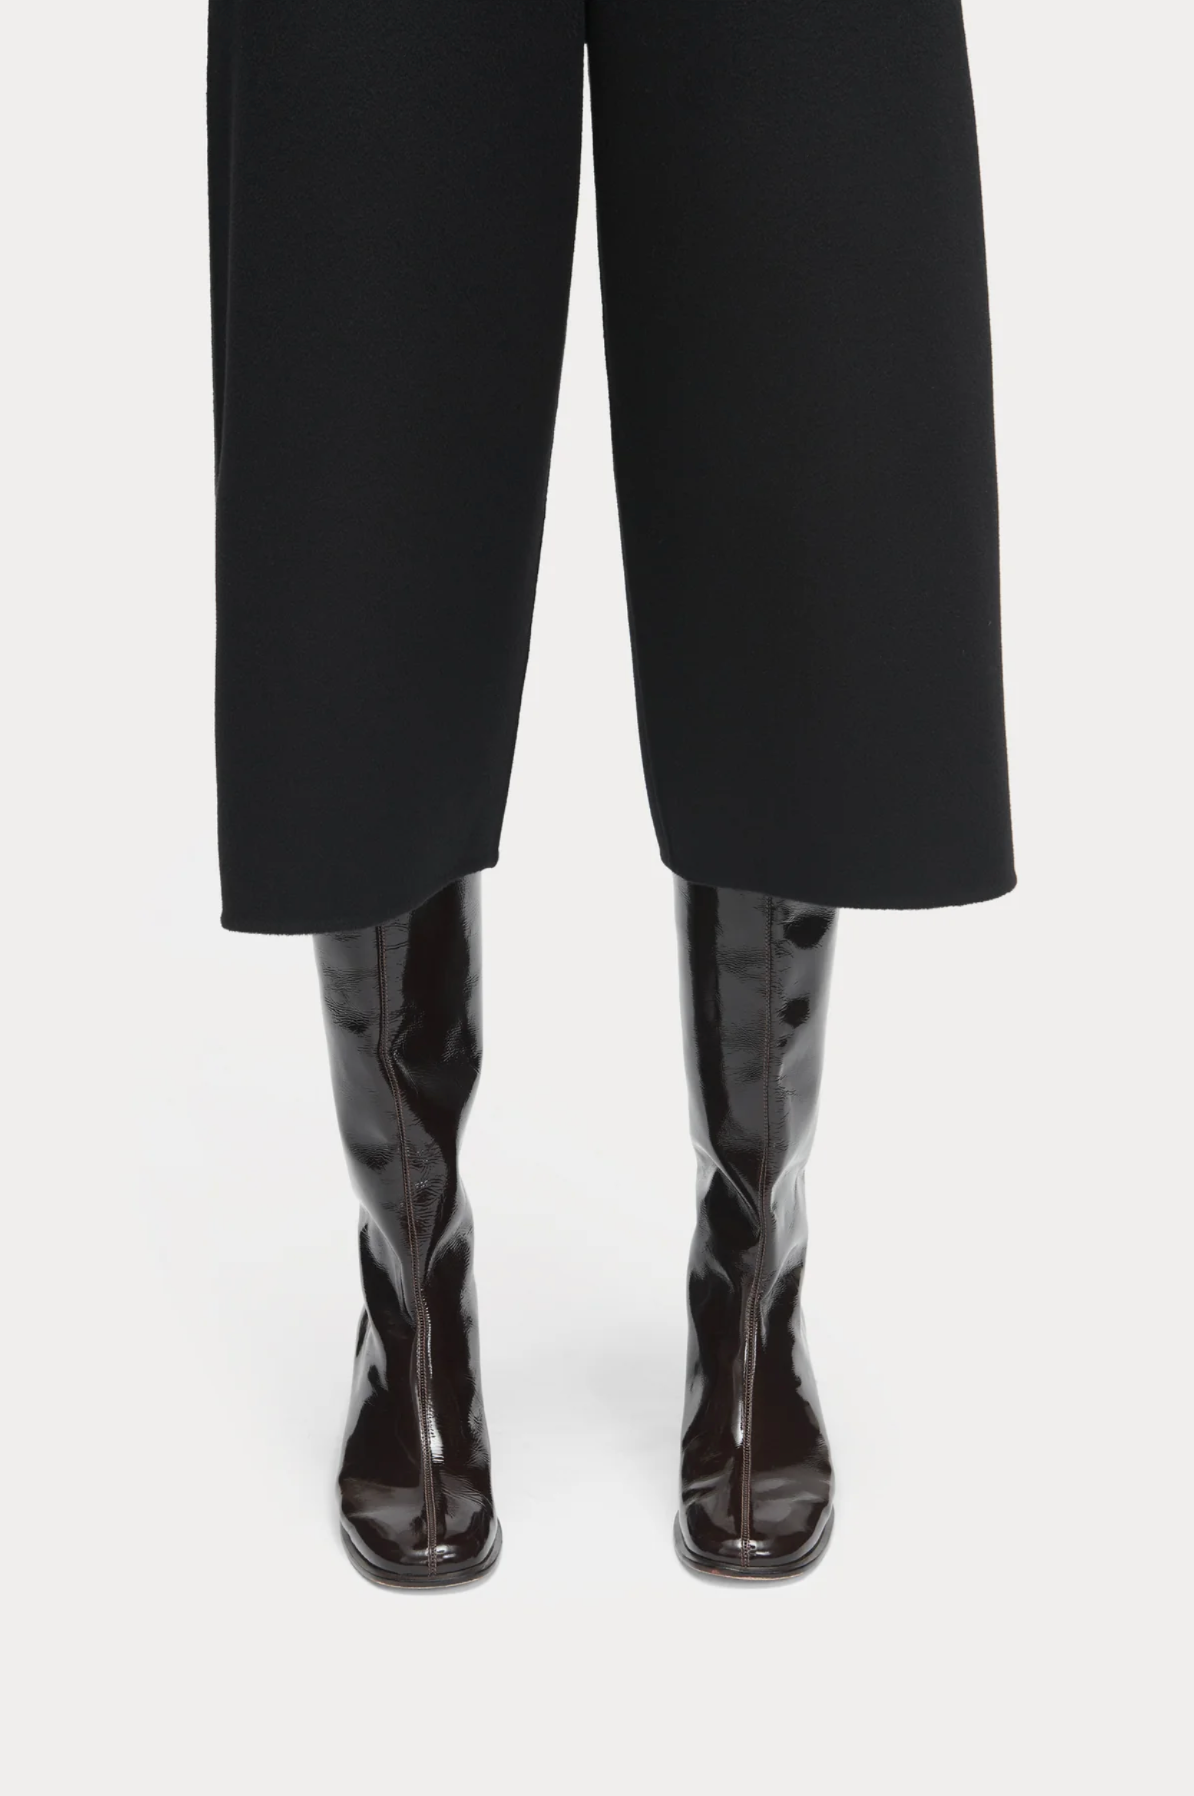 Sugarcane Boot in Brown Crinkle Patent Leather by Rachel Comey